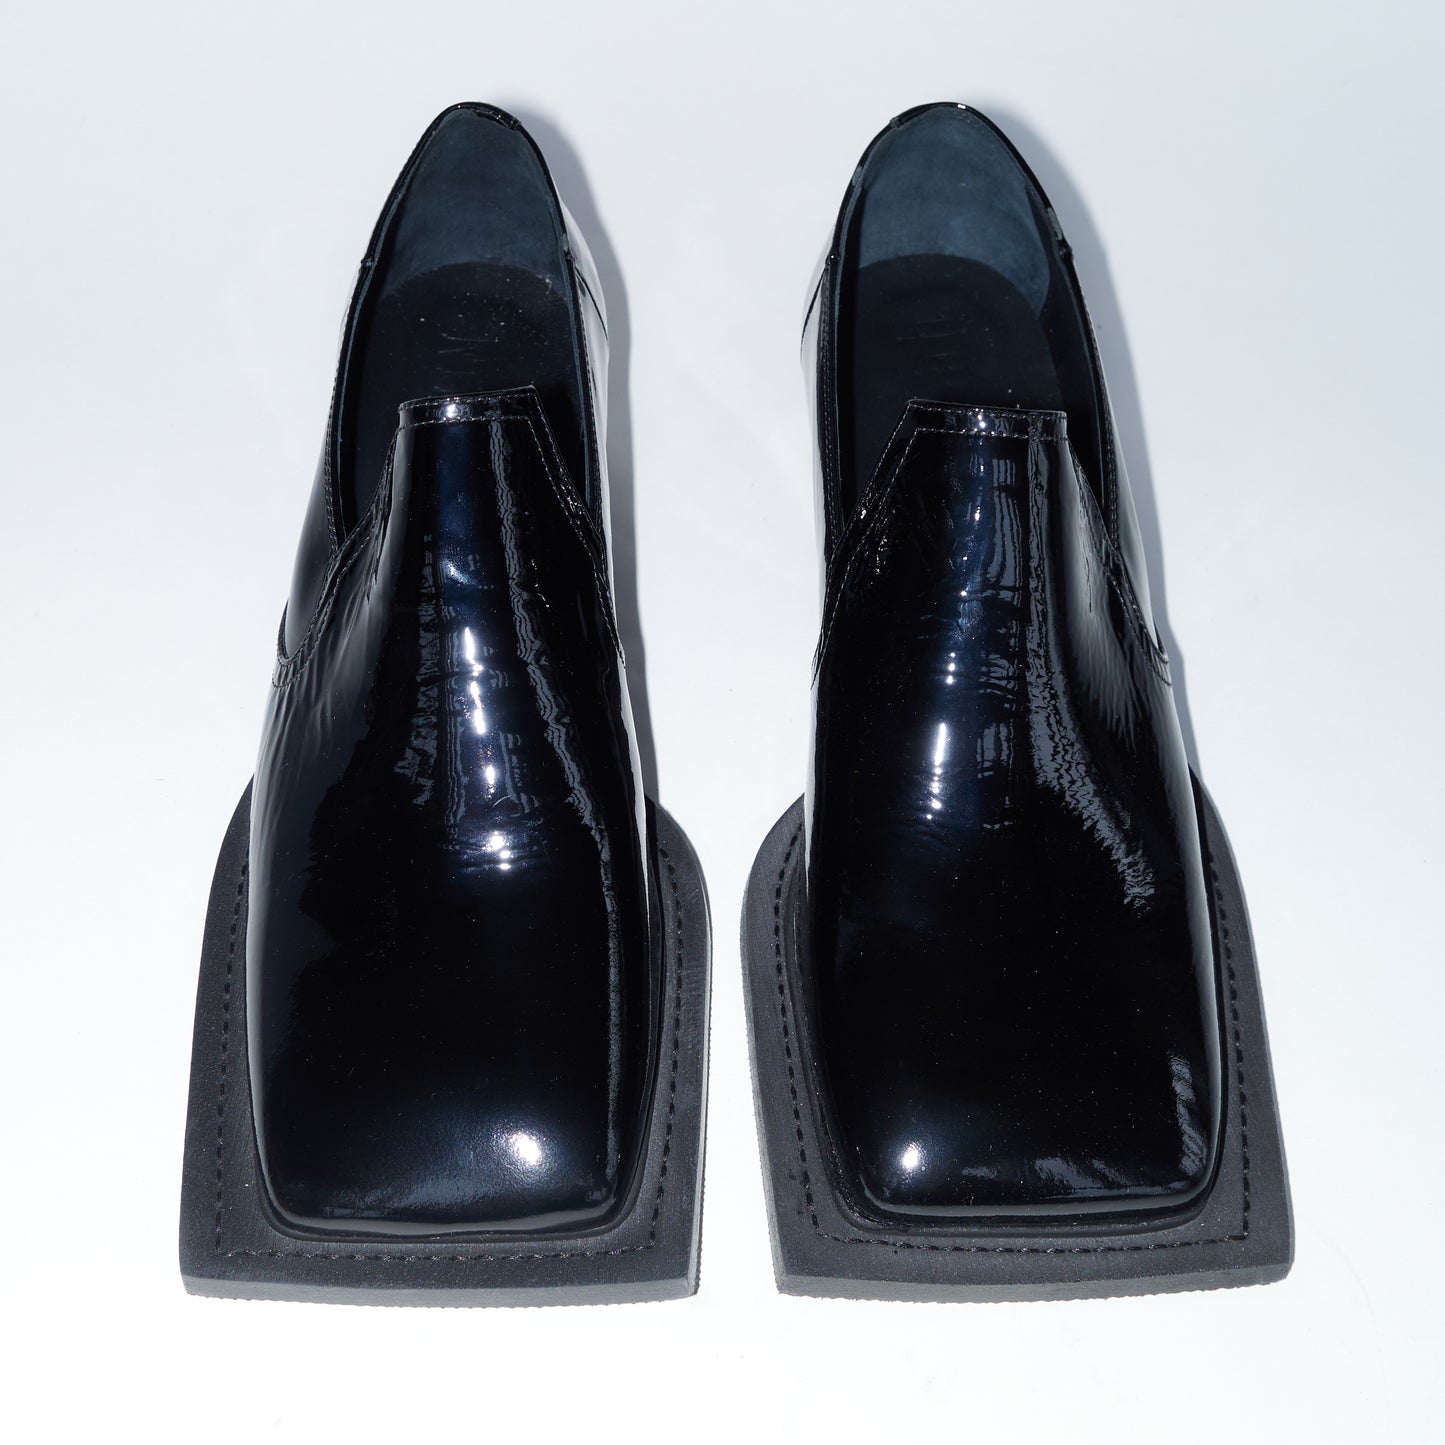 Howled in Patent Black Leather